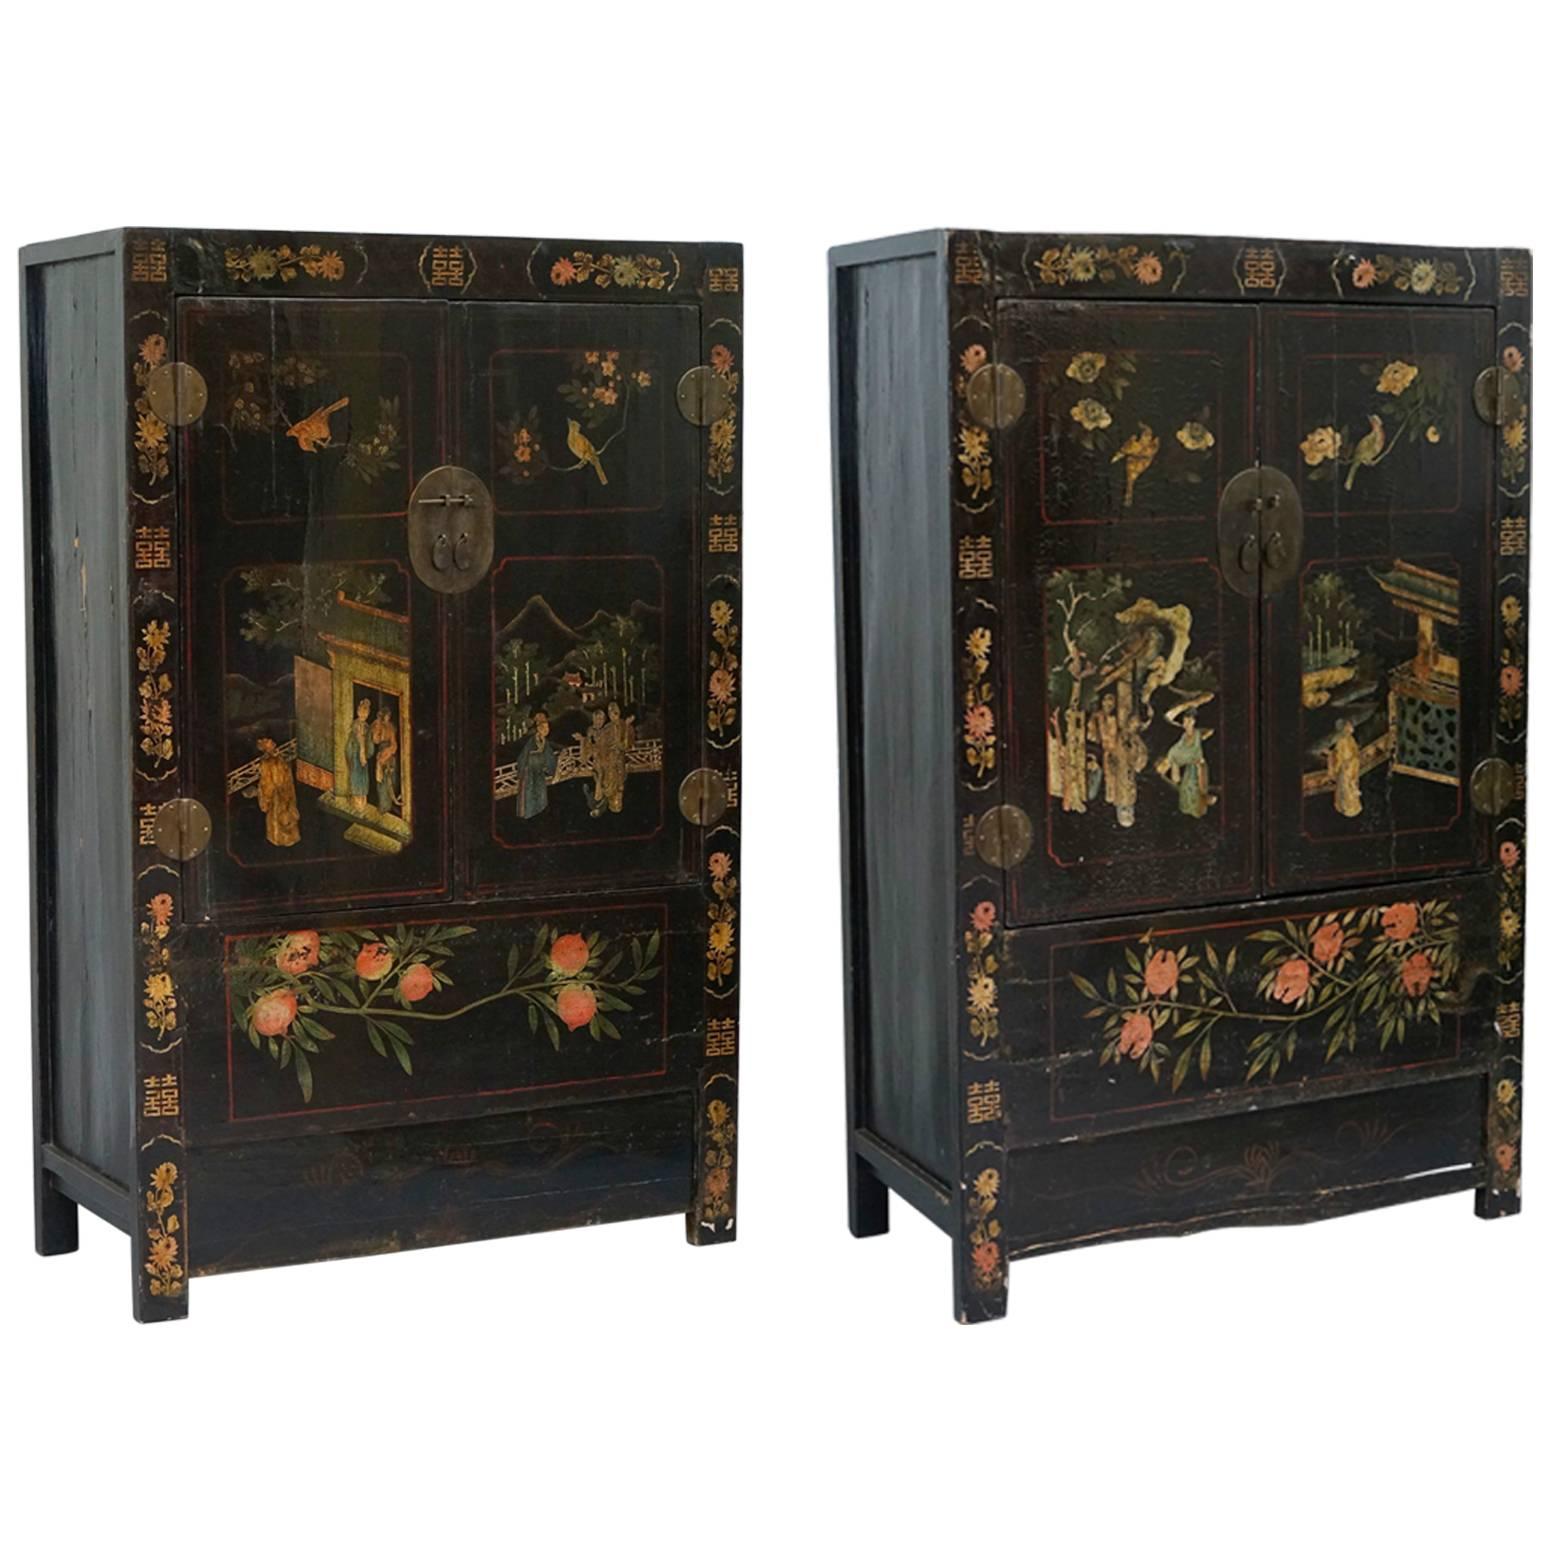 Pair of Chinese Solid Teak Chinoiserie Marriage Cabinets, circa 1880